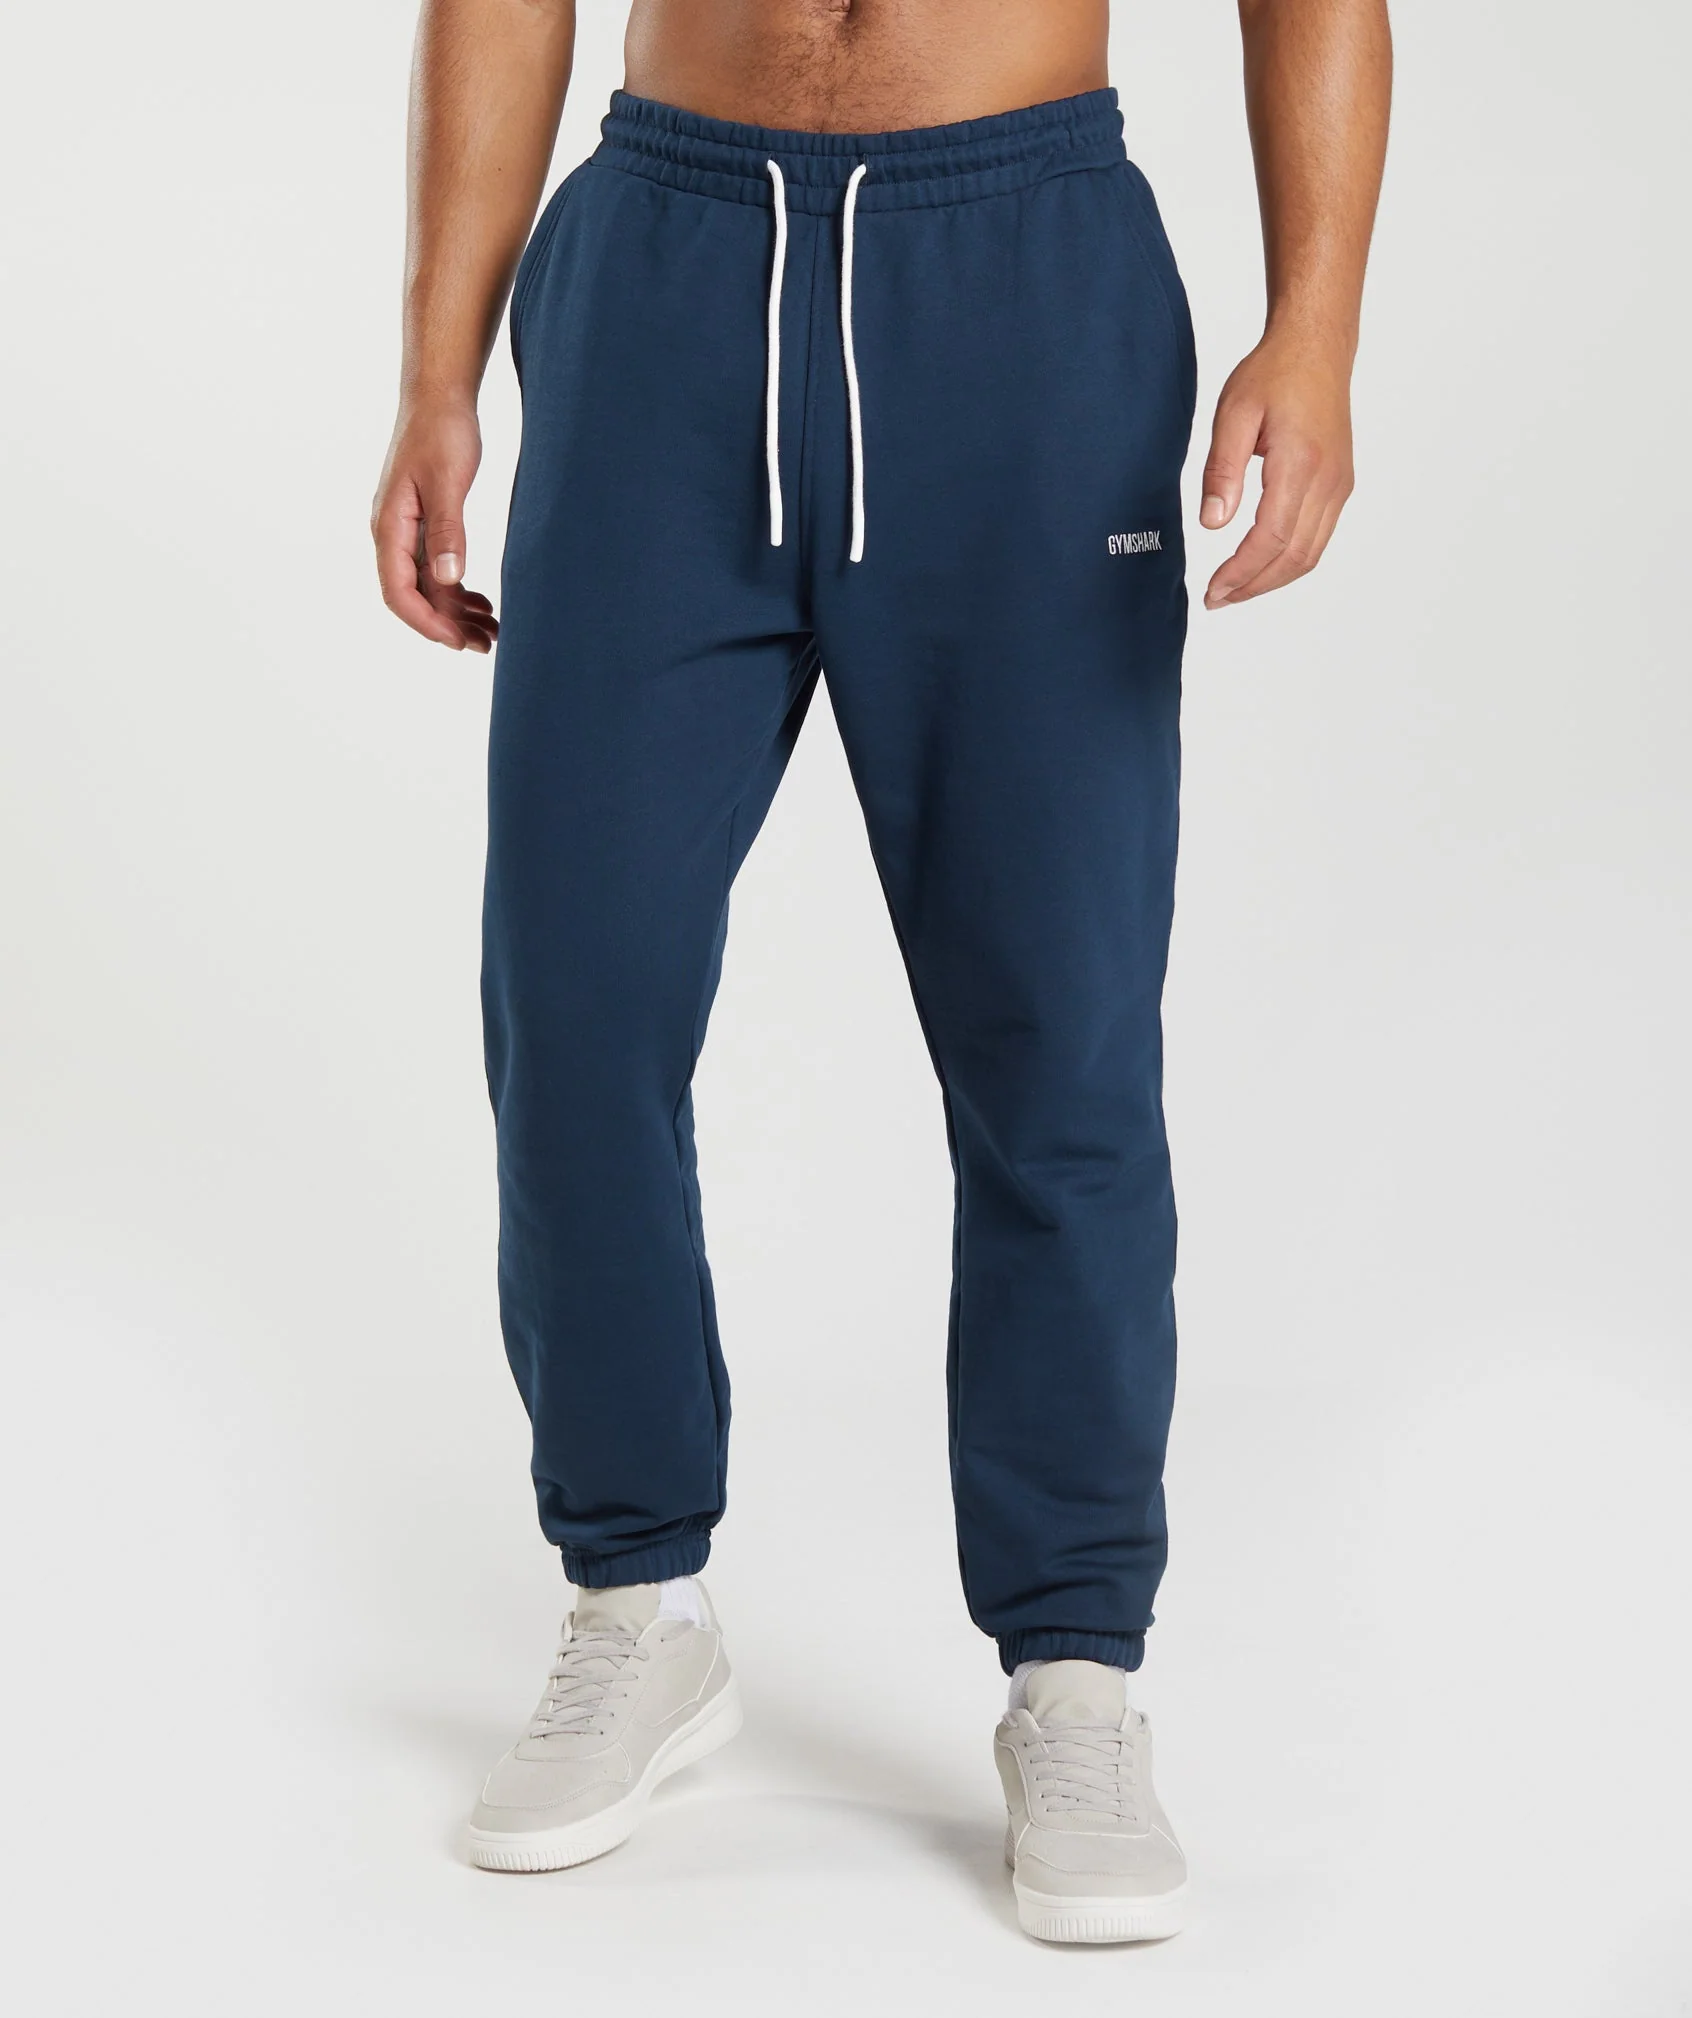 REST DAY SWEATS JOGGERS